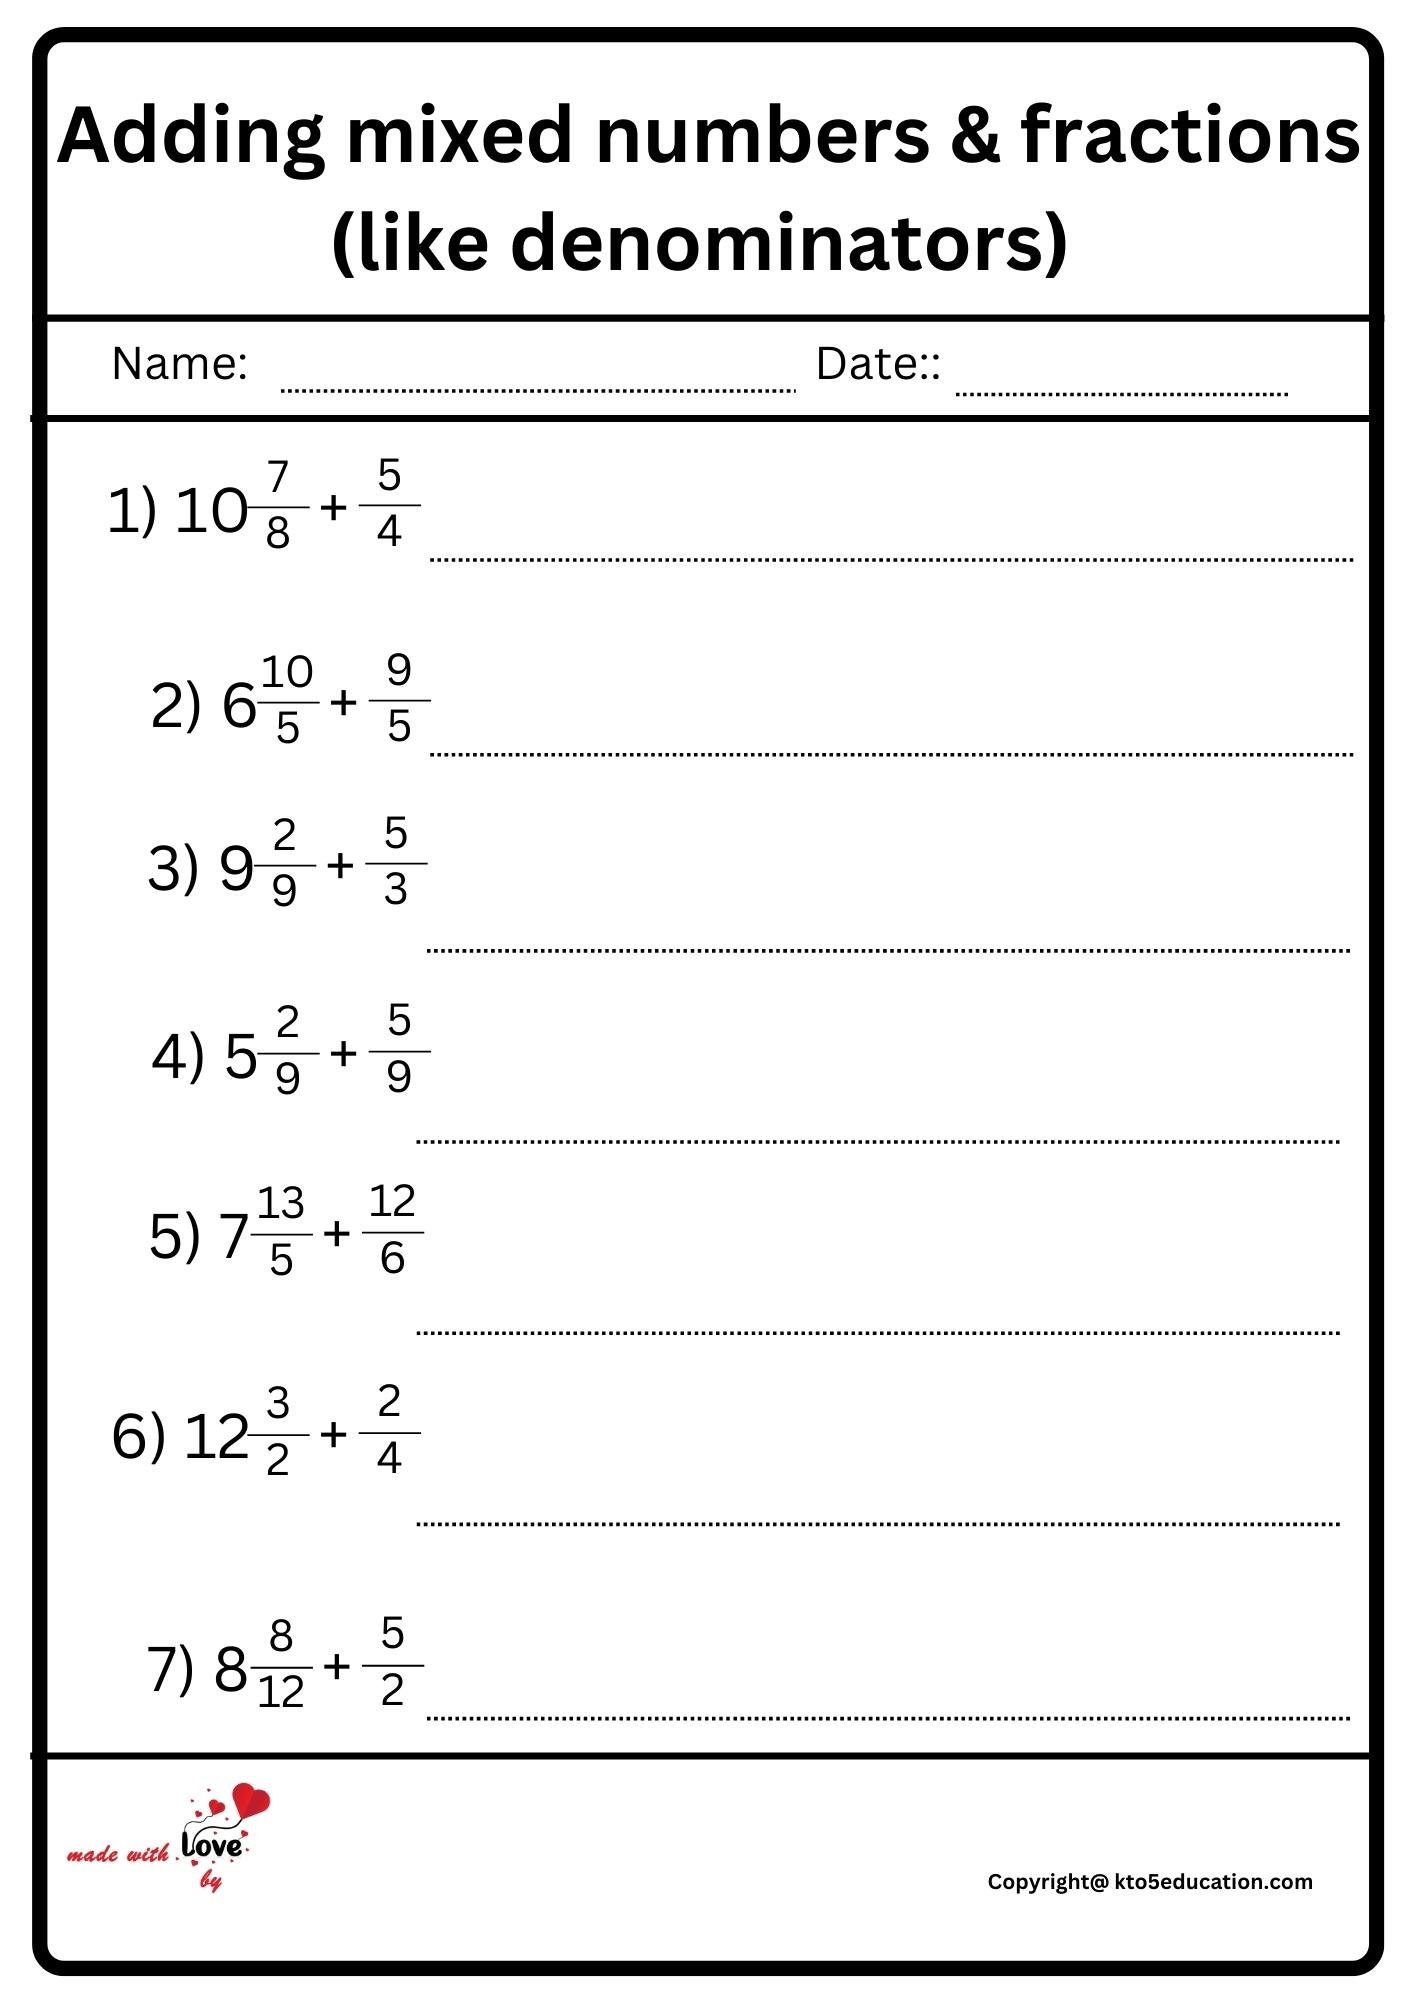 Adding Mixed Numbers And Fractions ( Like denominators) Worksheet